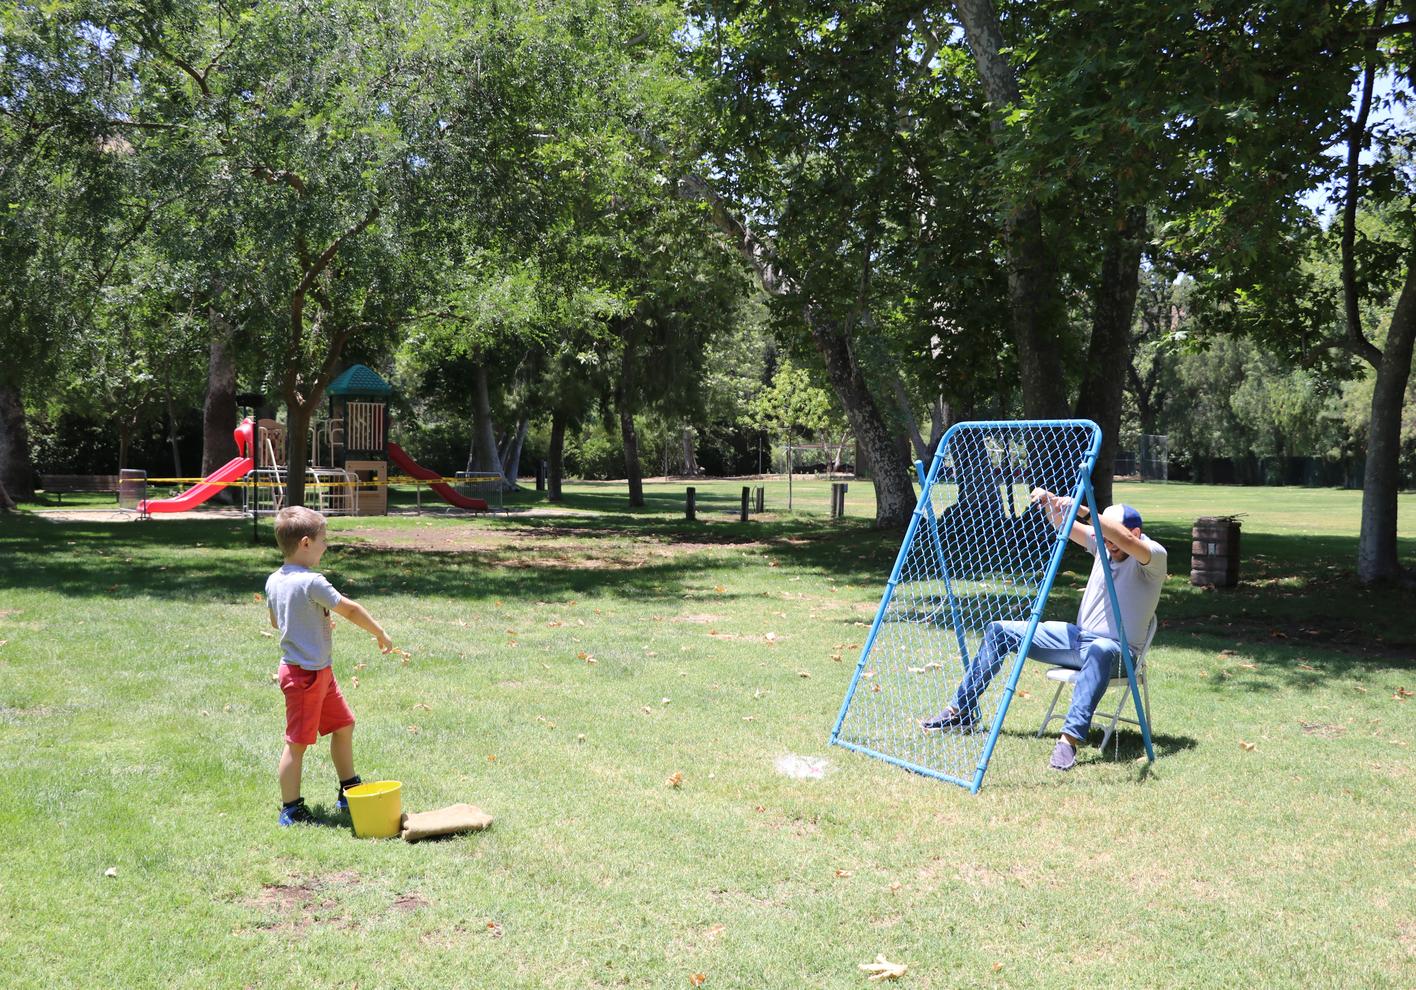 Family sports games and activities